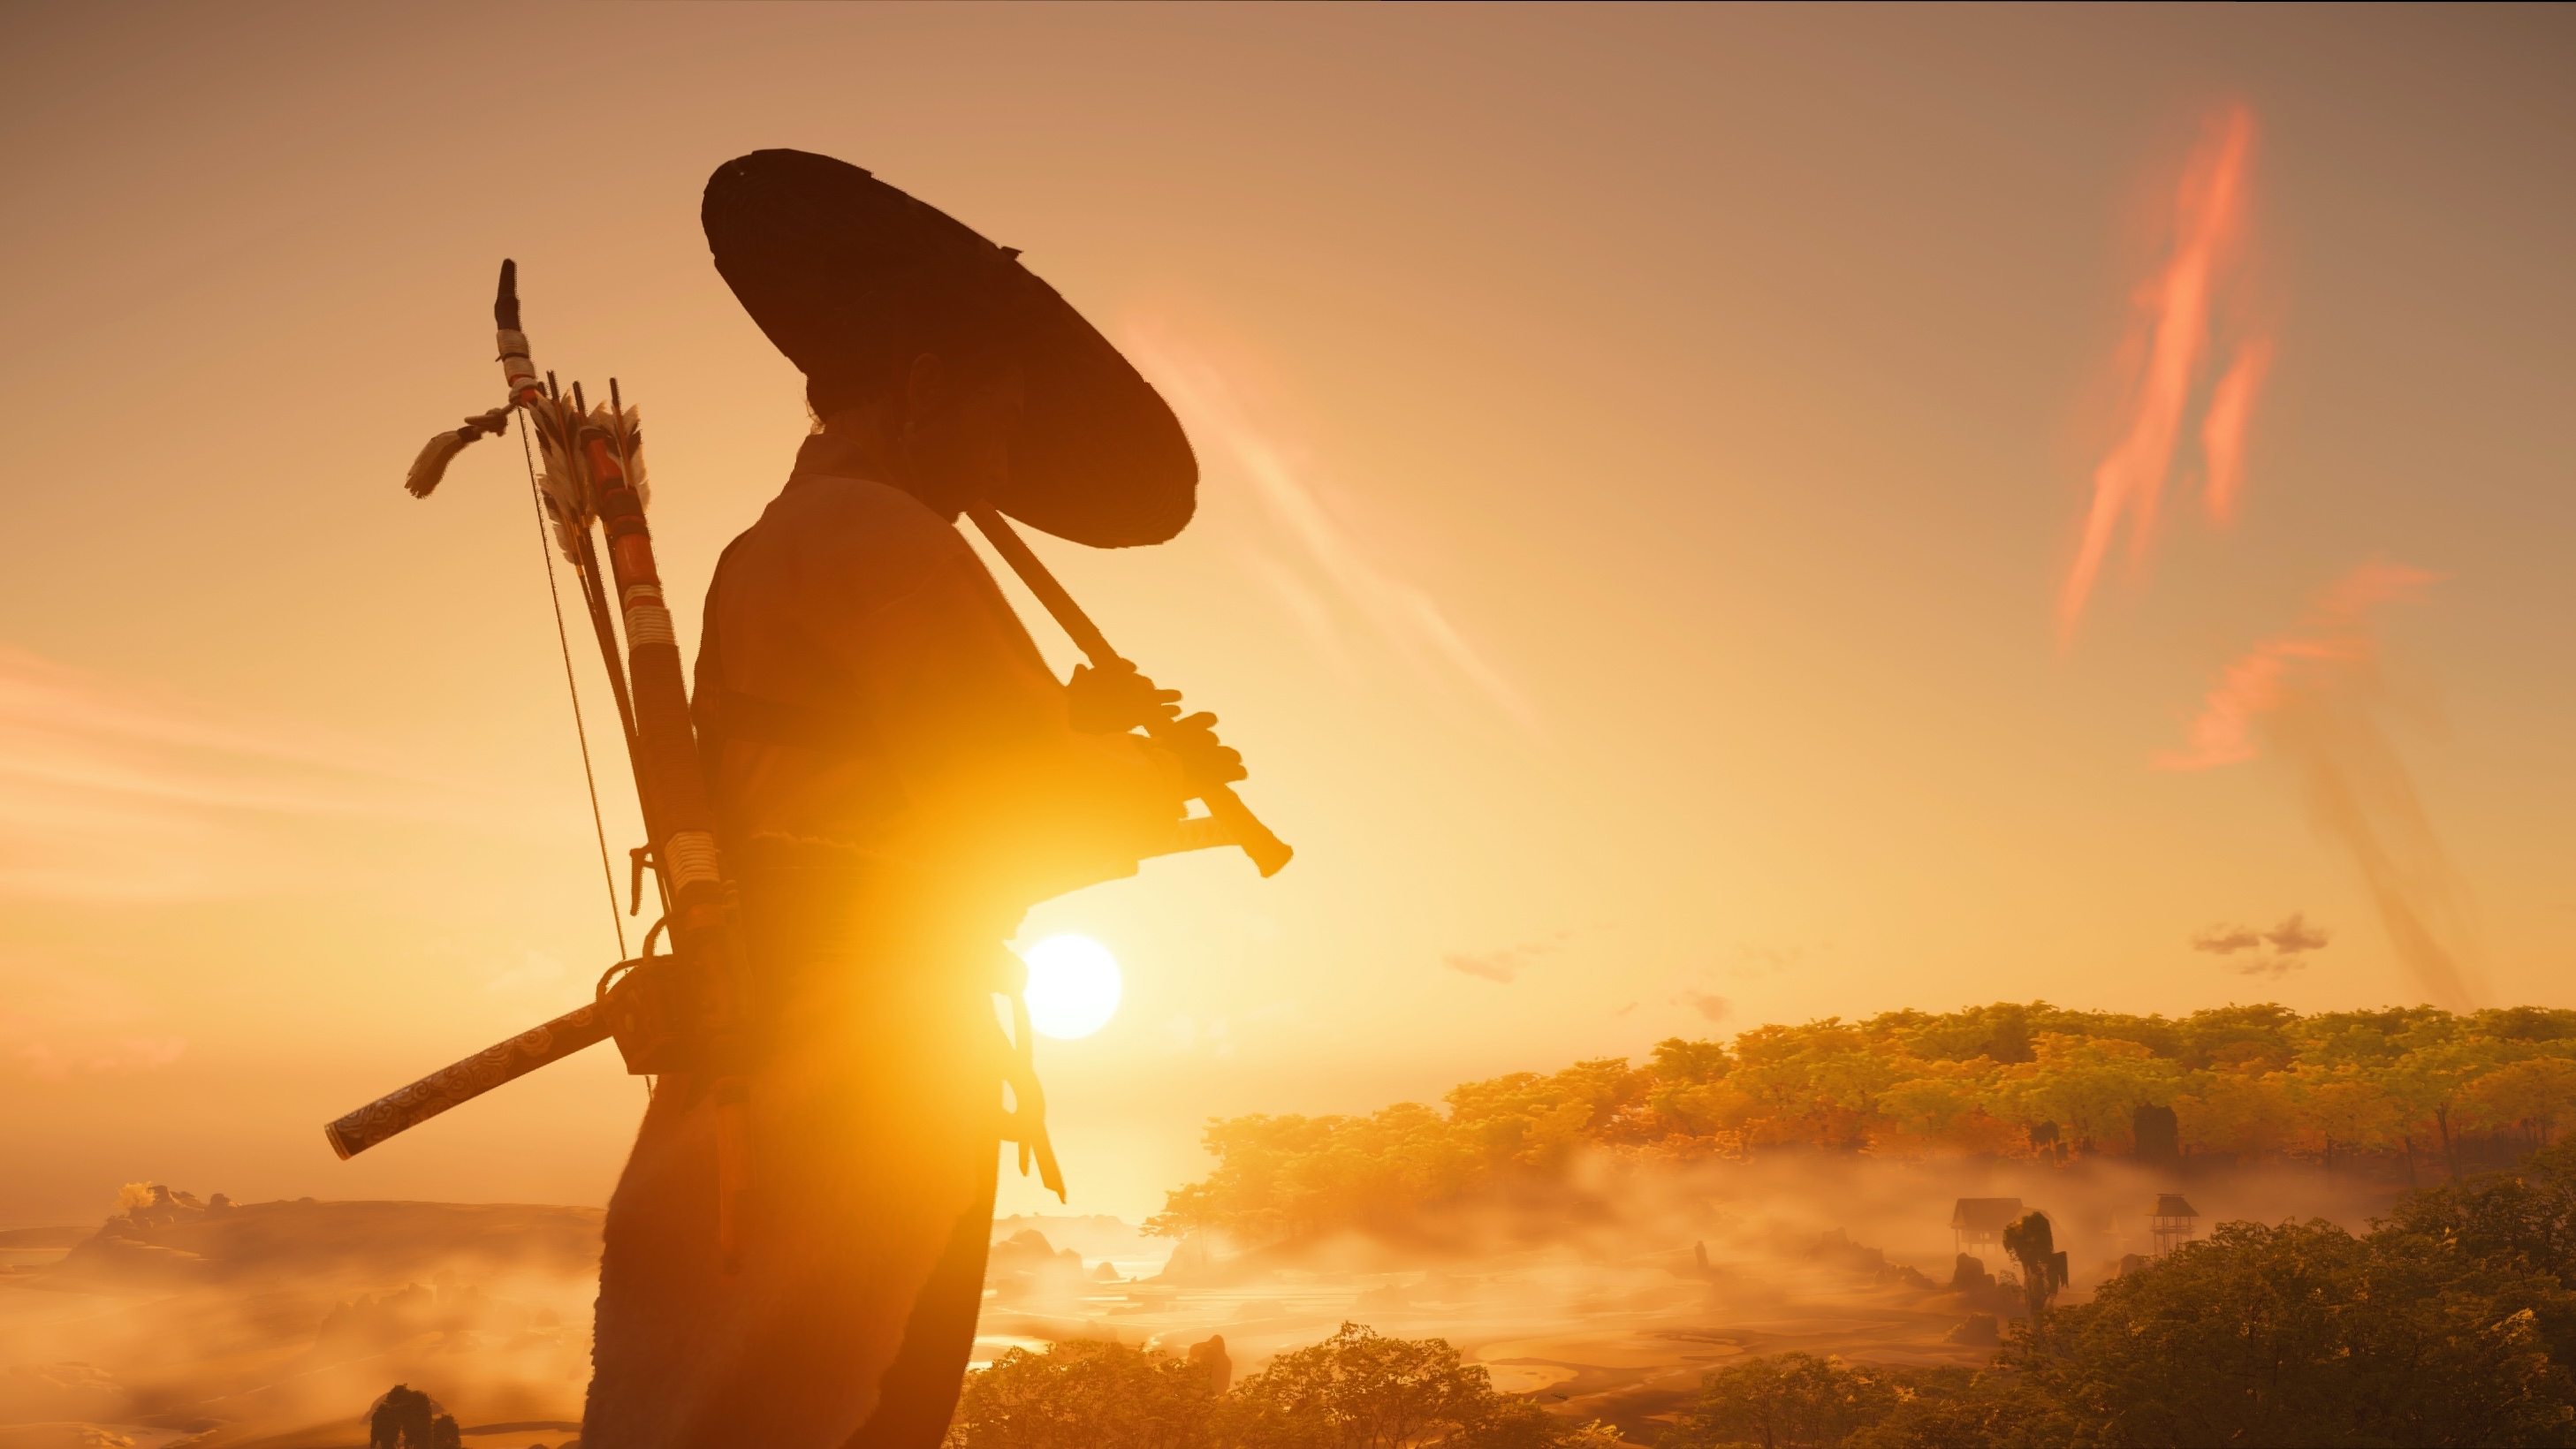  Ghost of Tsushima's crossplay function will launch with a 'beta' tag attached, prompting speculation that Sony is hoping to avoid another PSN-related fiasco 